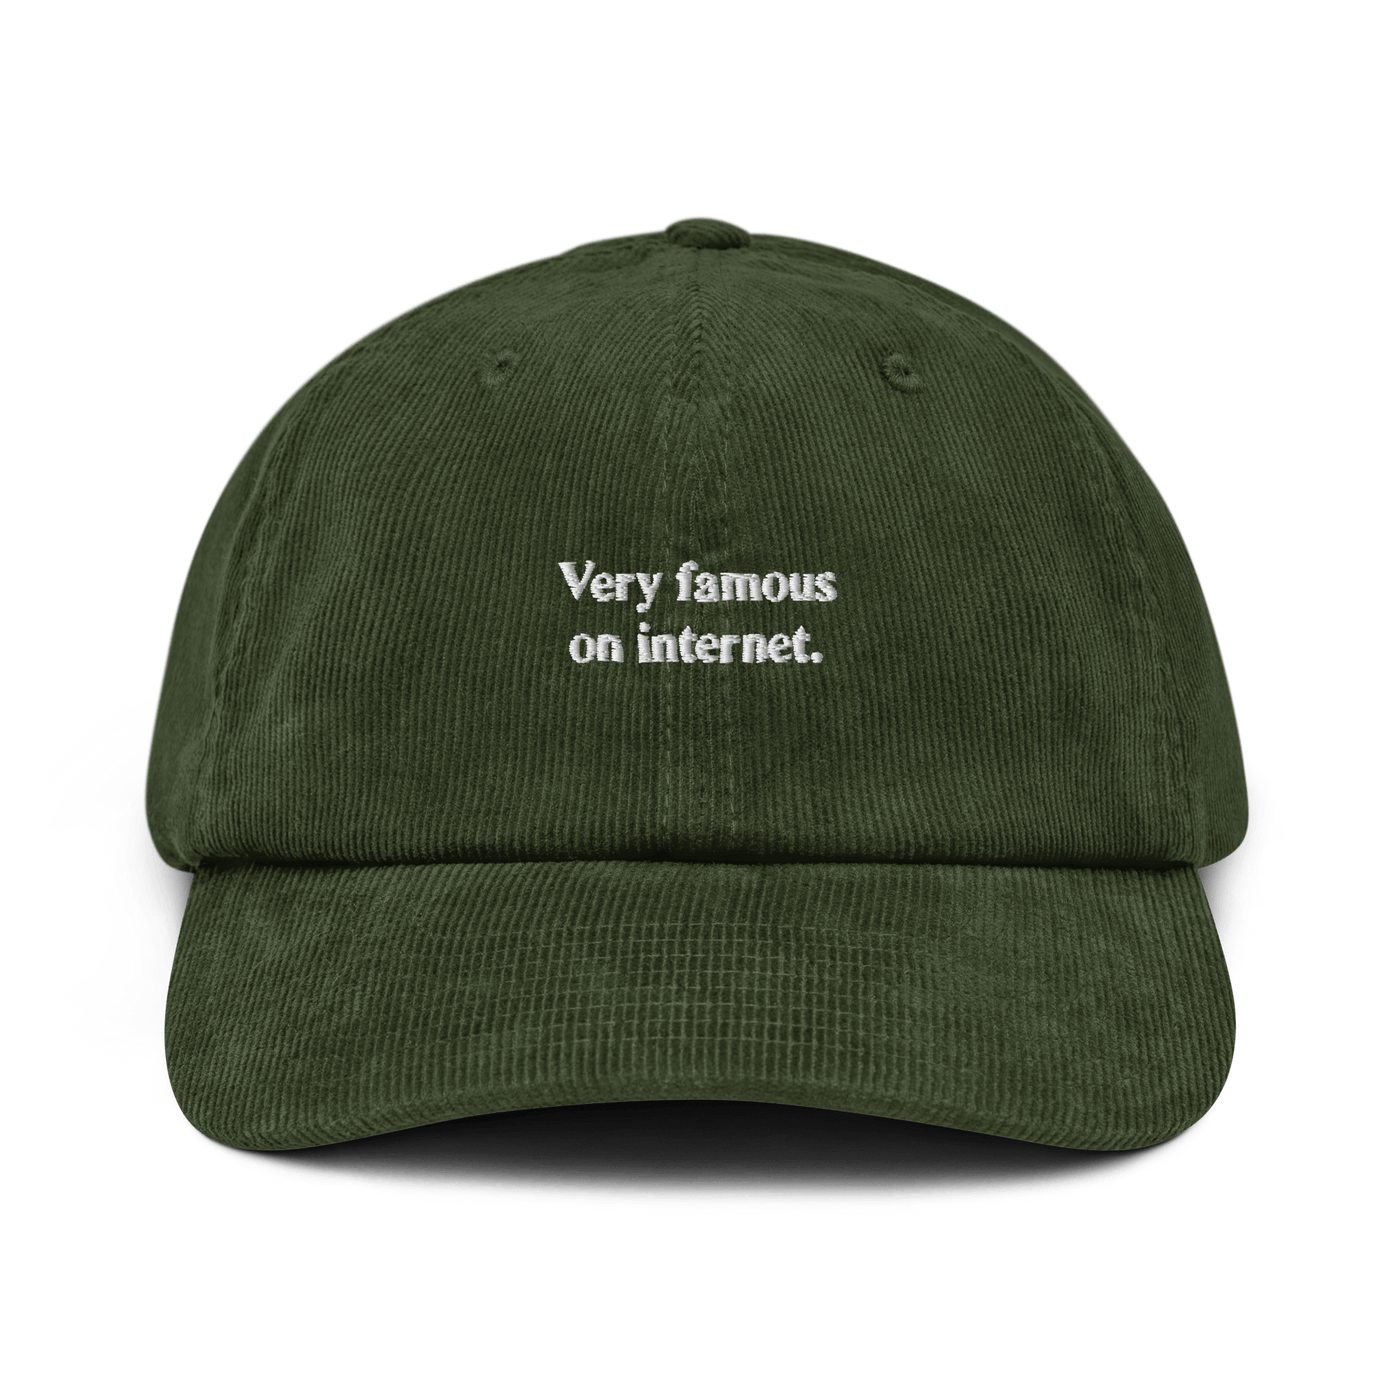 Very famous on internet Corduroy hat - Dark Olive - - Just Another Cap Store